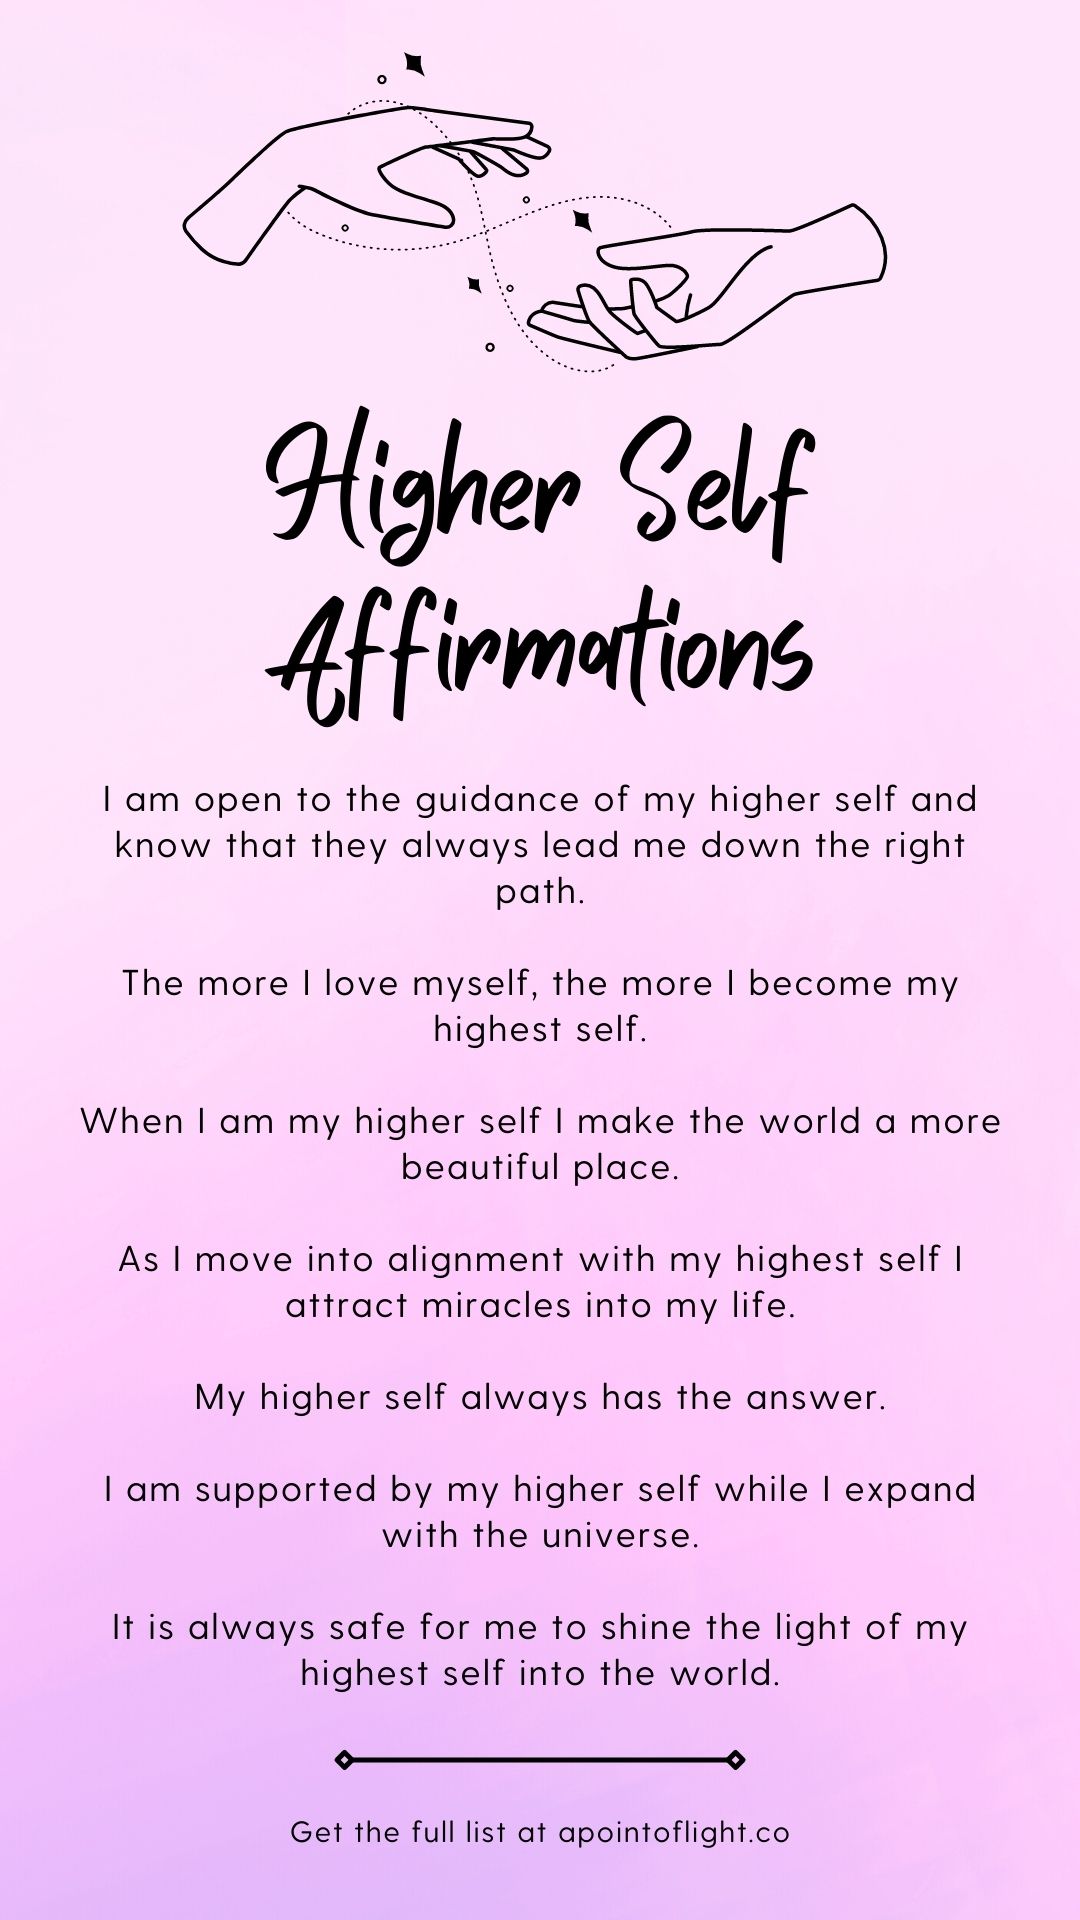 6 Ways to Connect With Your Higher Self - A Point of Light